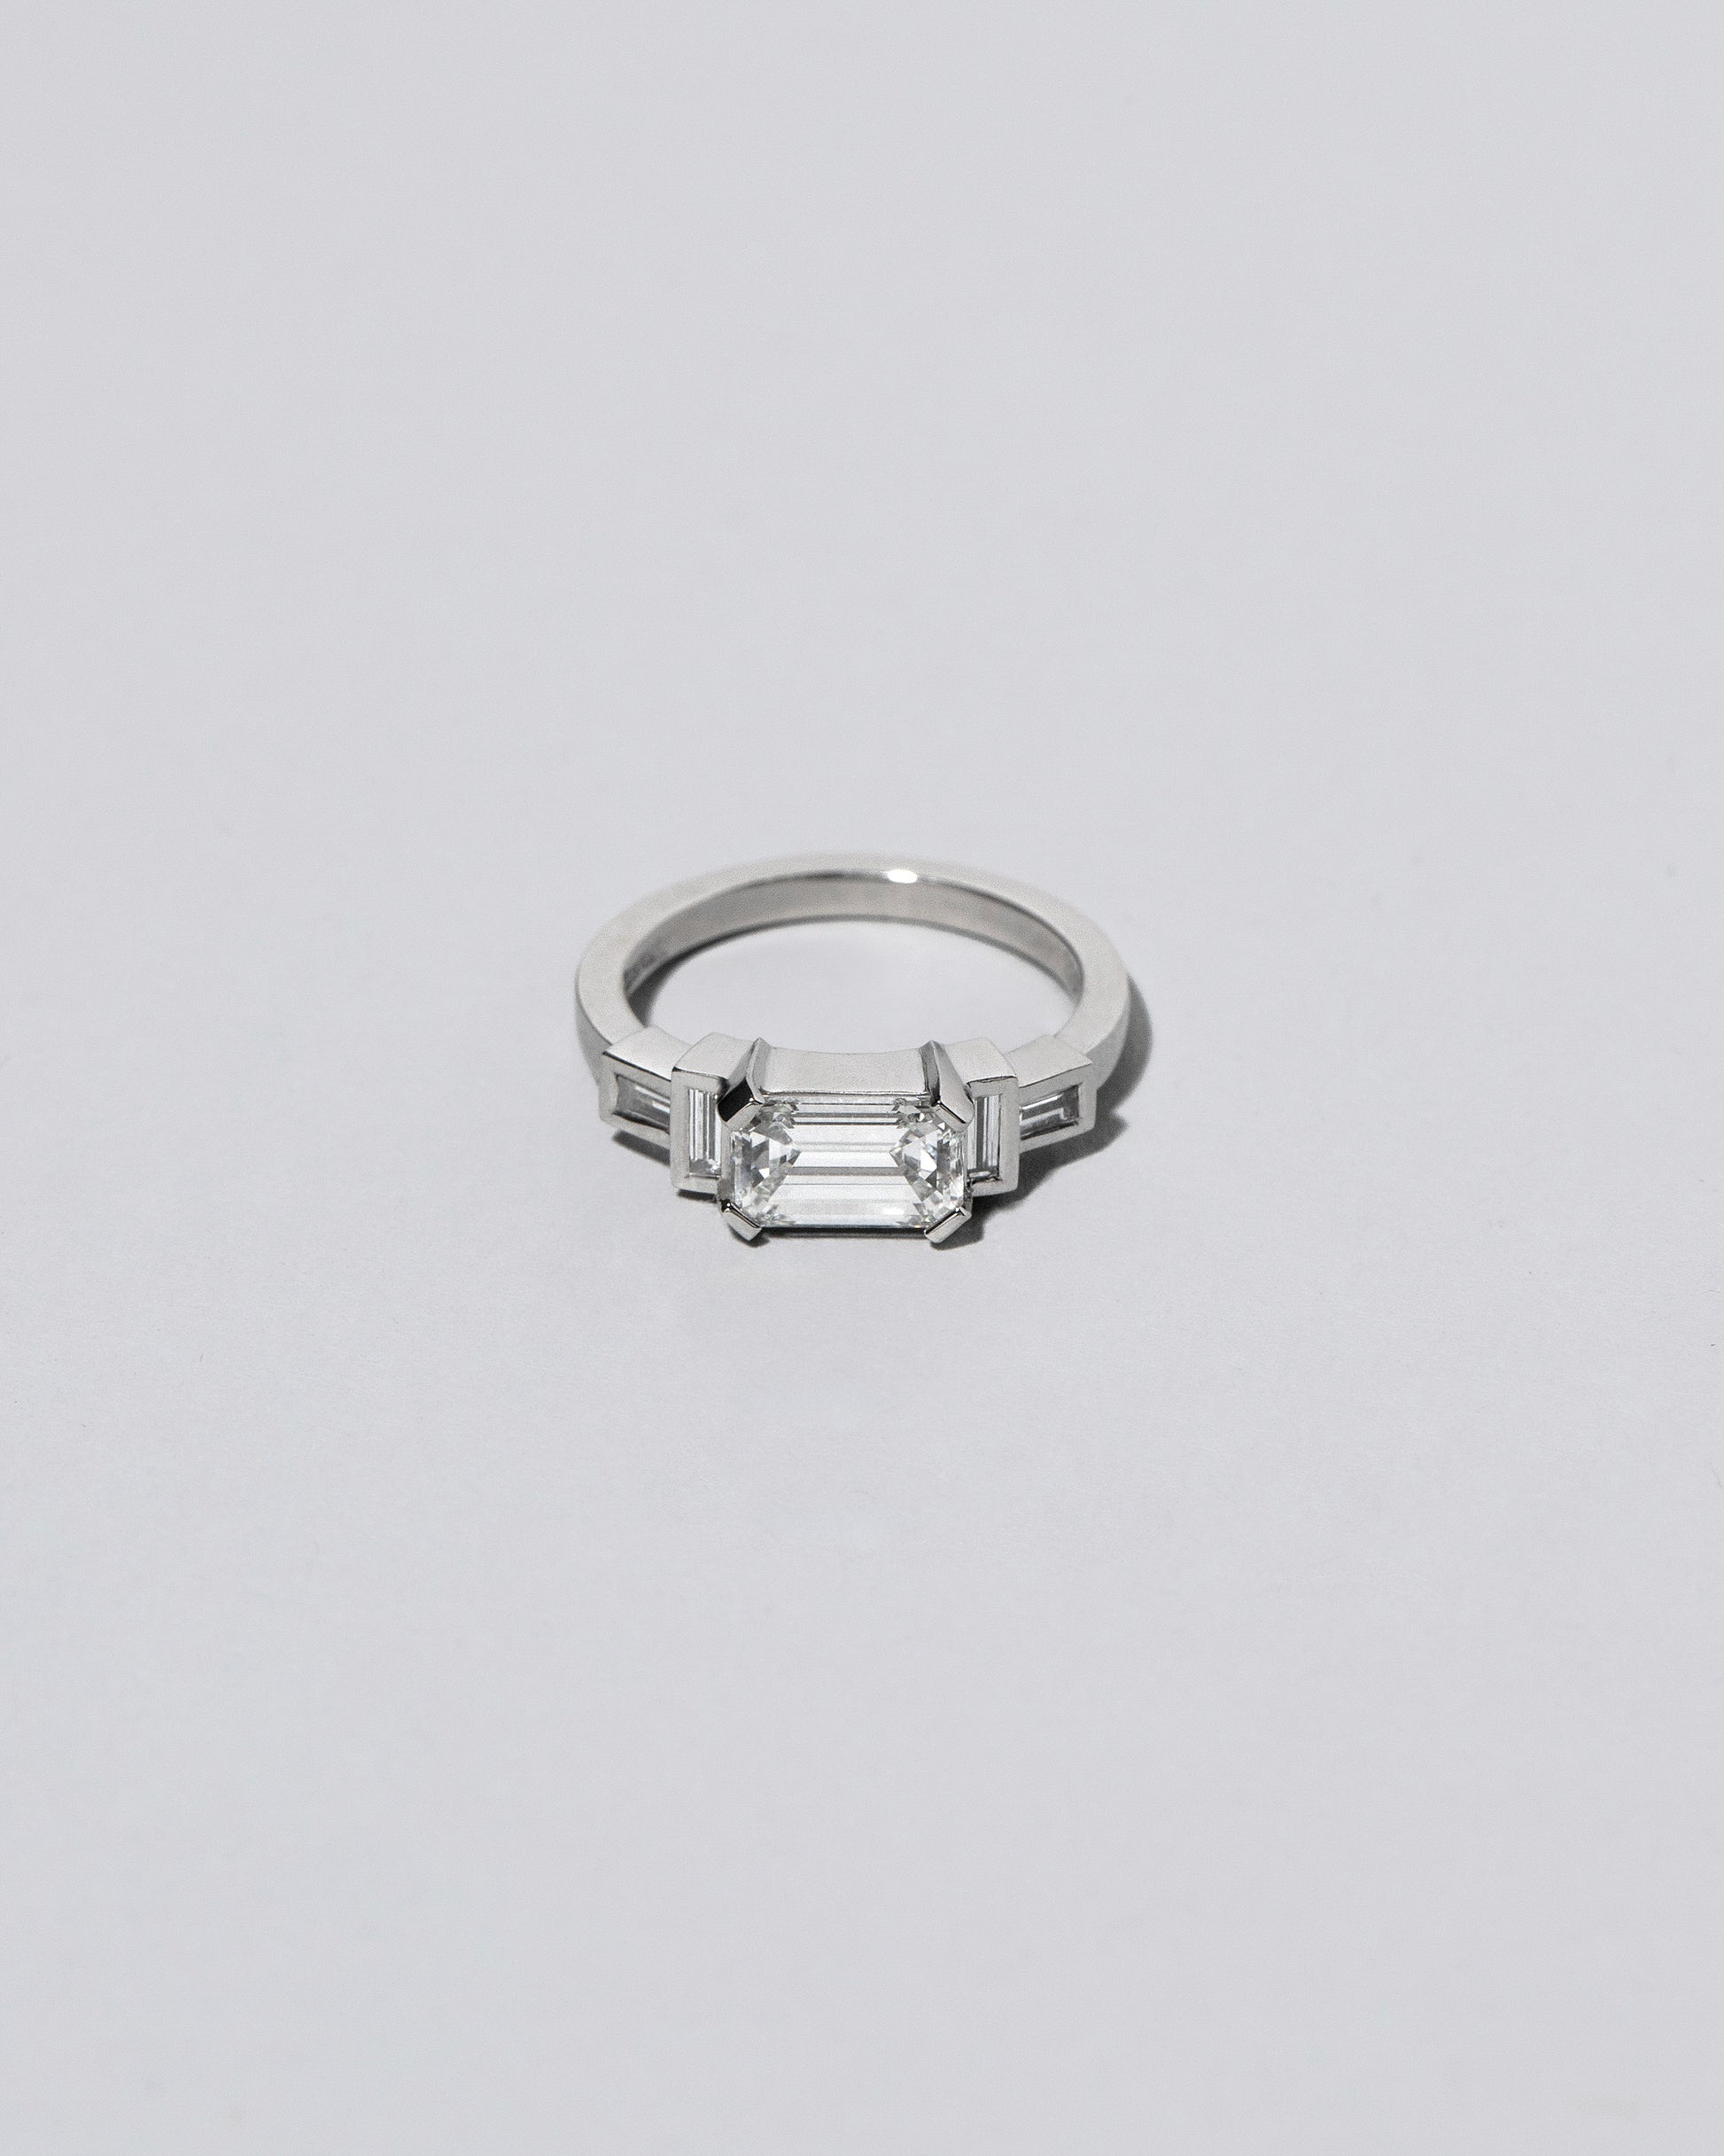 Platinum Expression Ring on light color background. Please note: This image represents a custom creation.